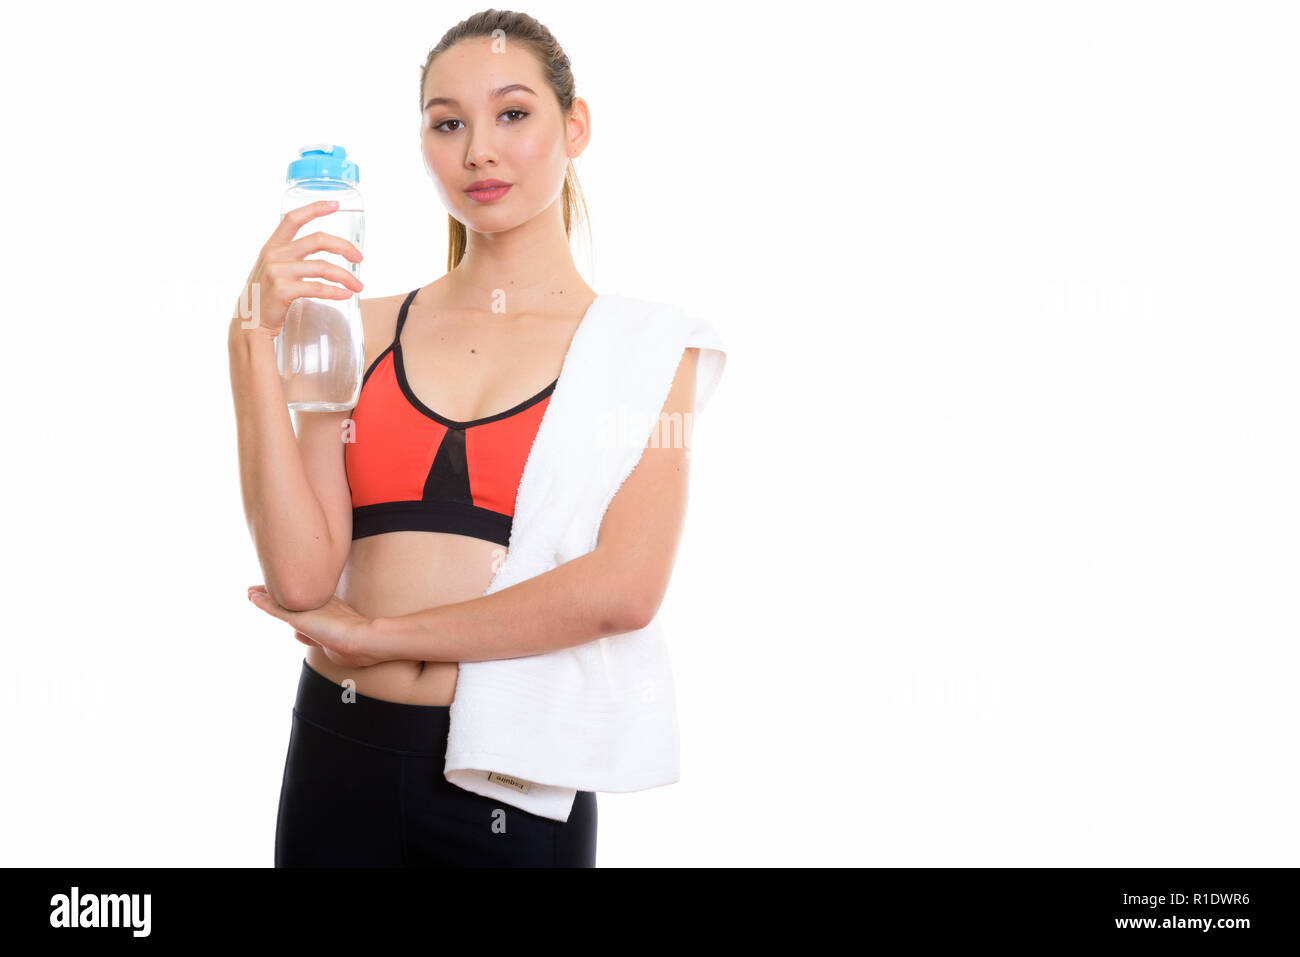 Studio shot of young beautiful Asian woman holding water bottle Banque D'Images